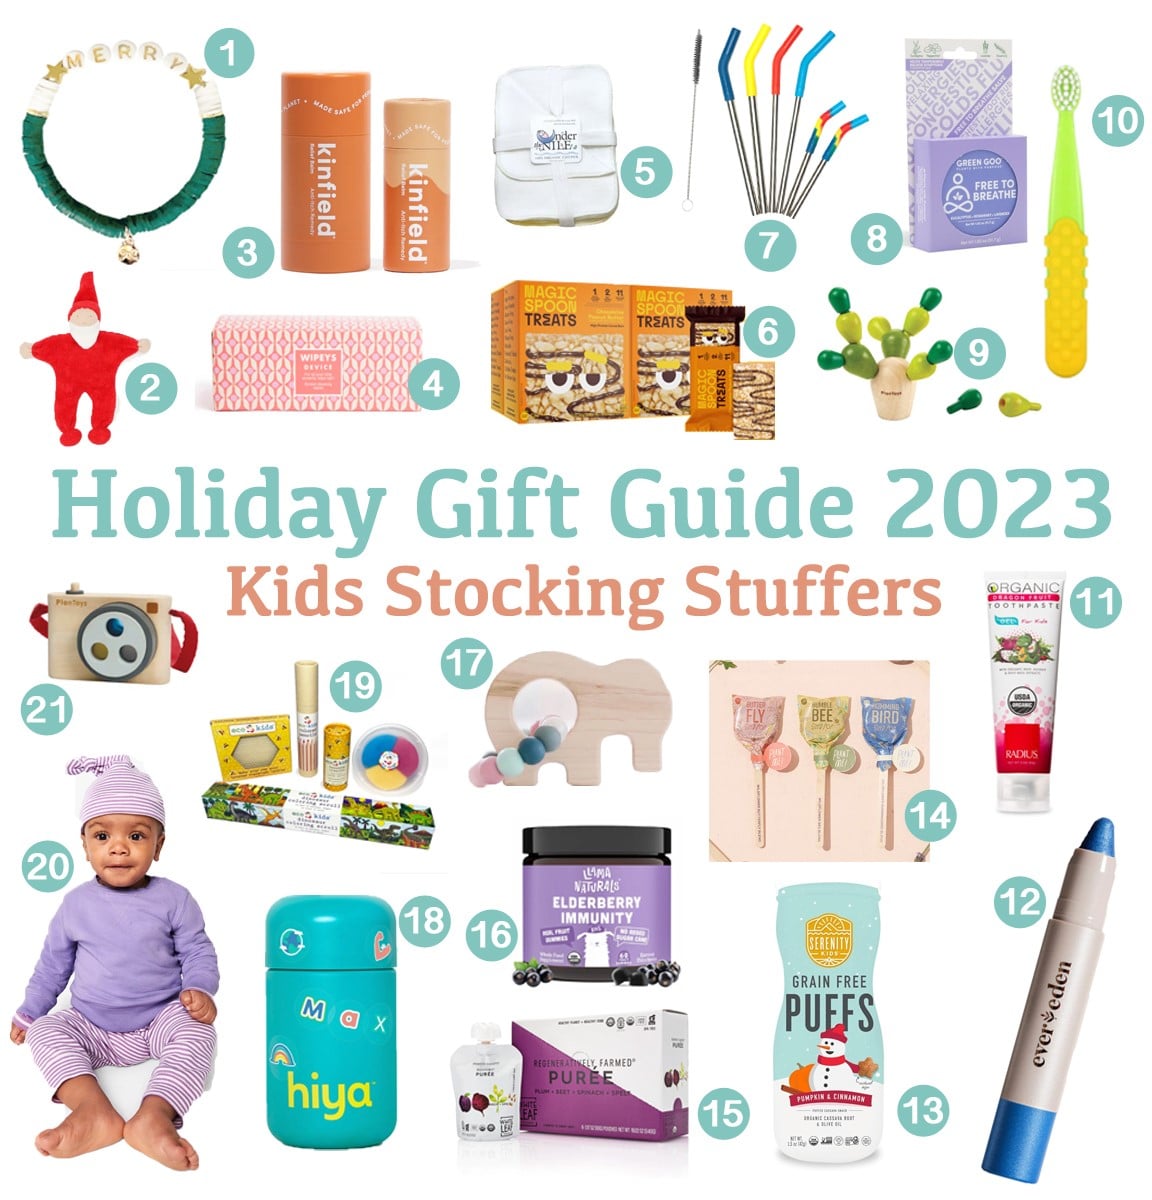 2023 Holiday Gift Guide - Gimme the Good Stuff